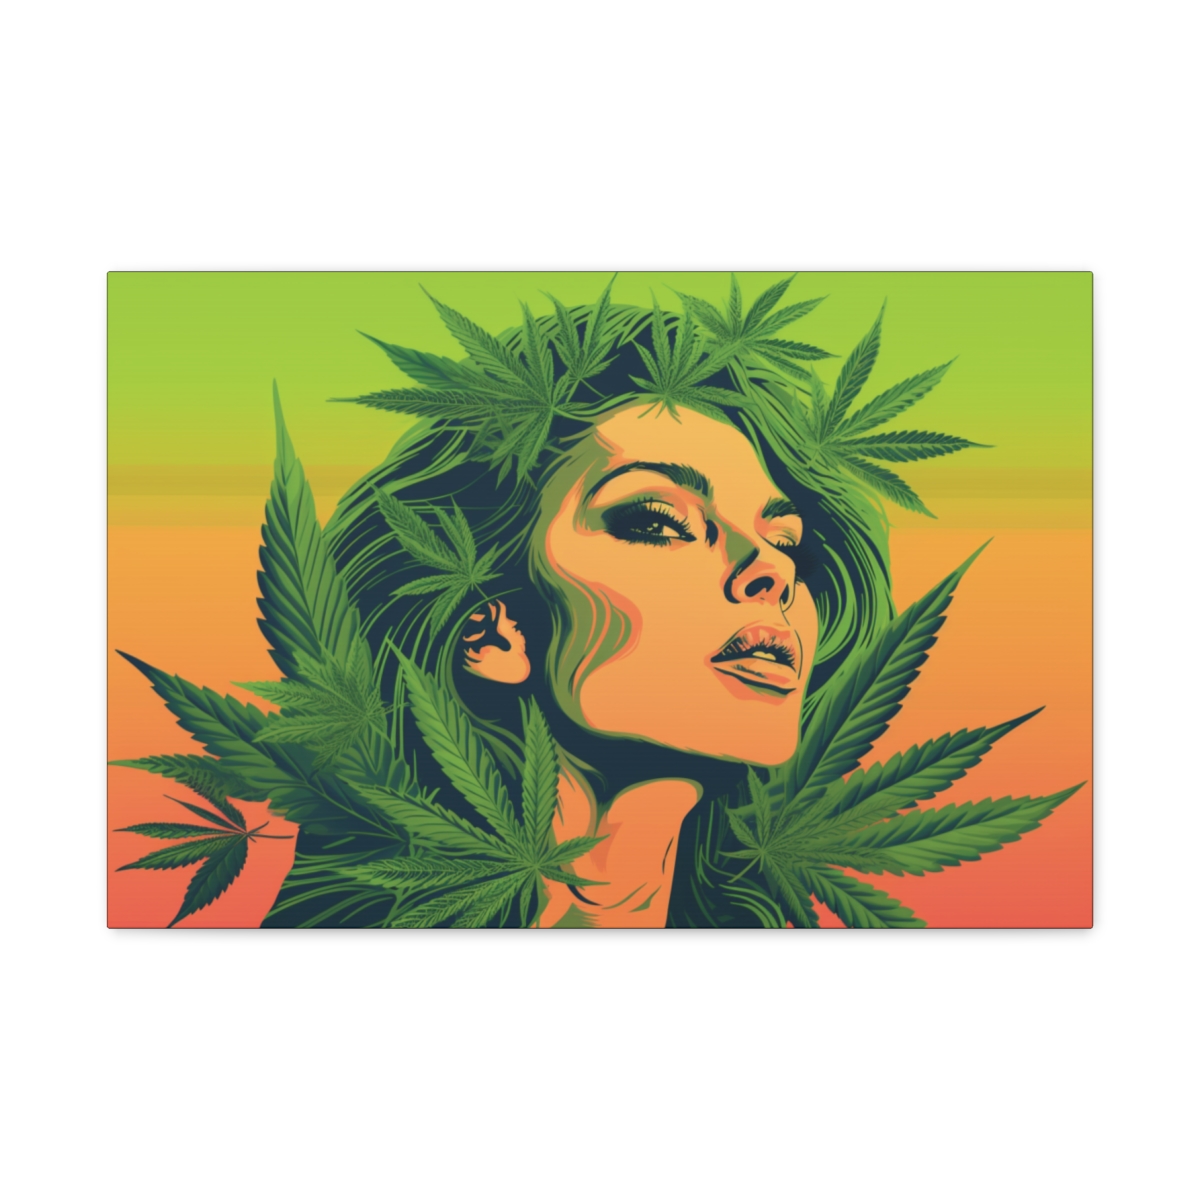 Weed Art Canvas Print: Girl You’re Stoned